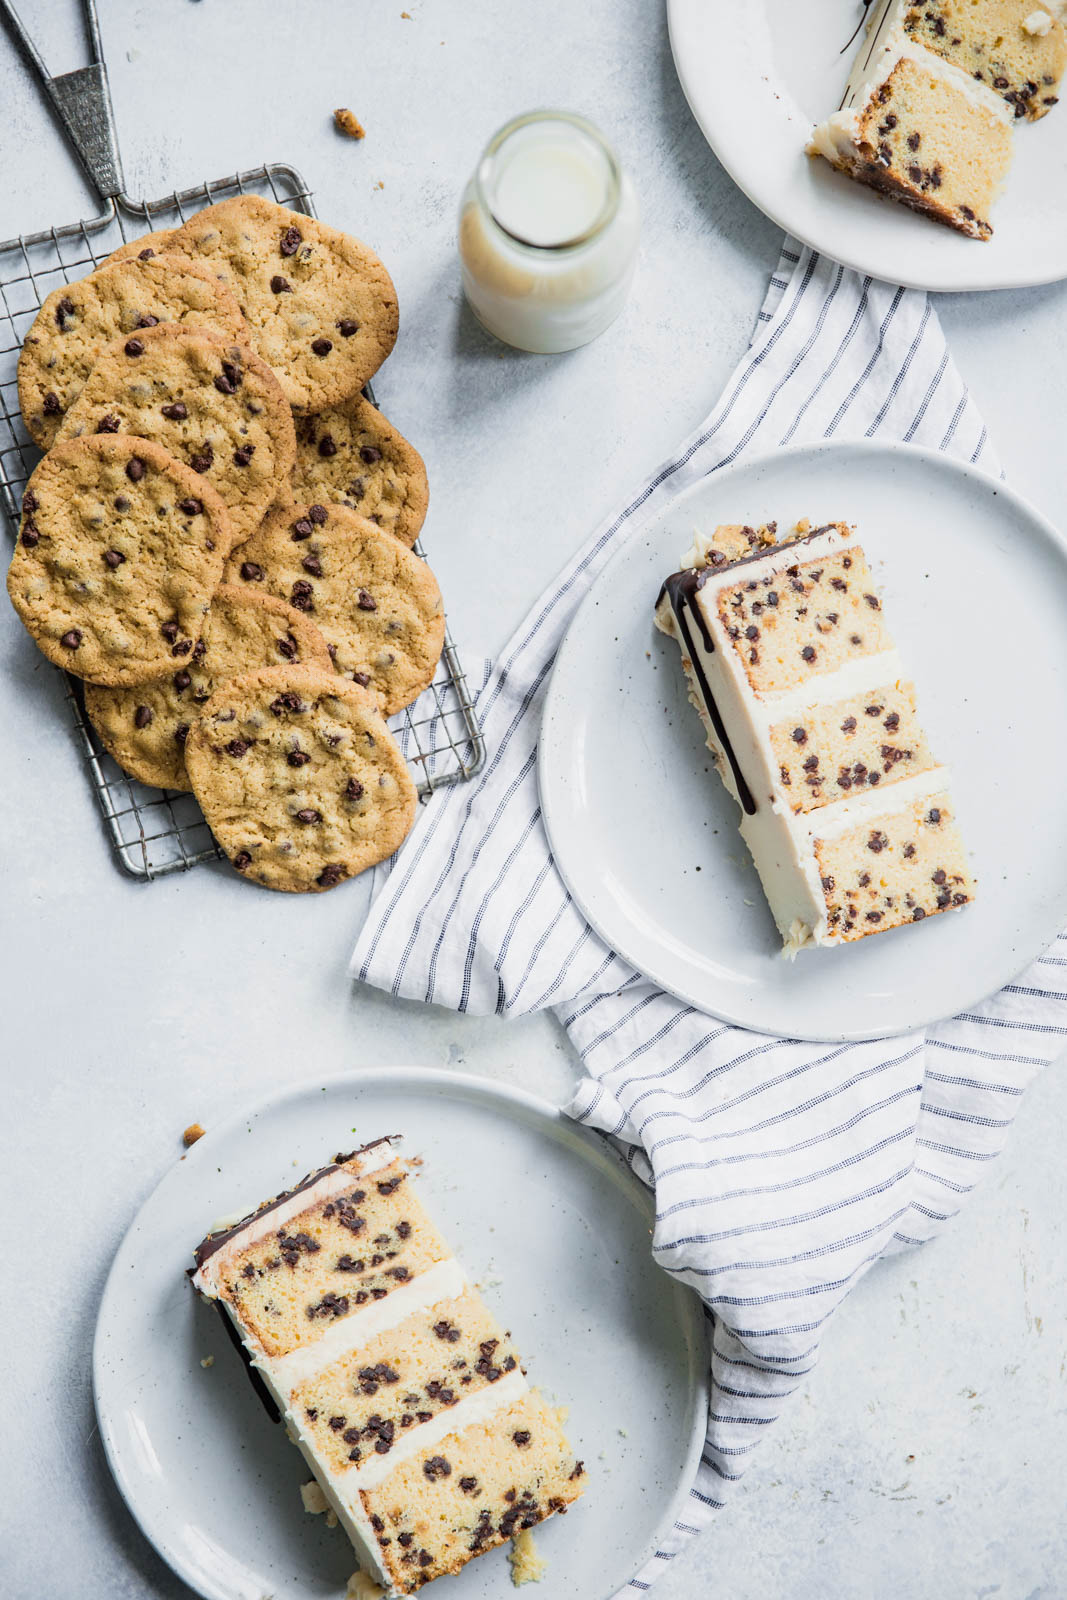 Chocolate chip cake slices next to cookies